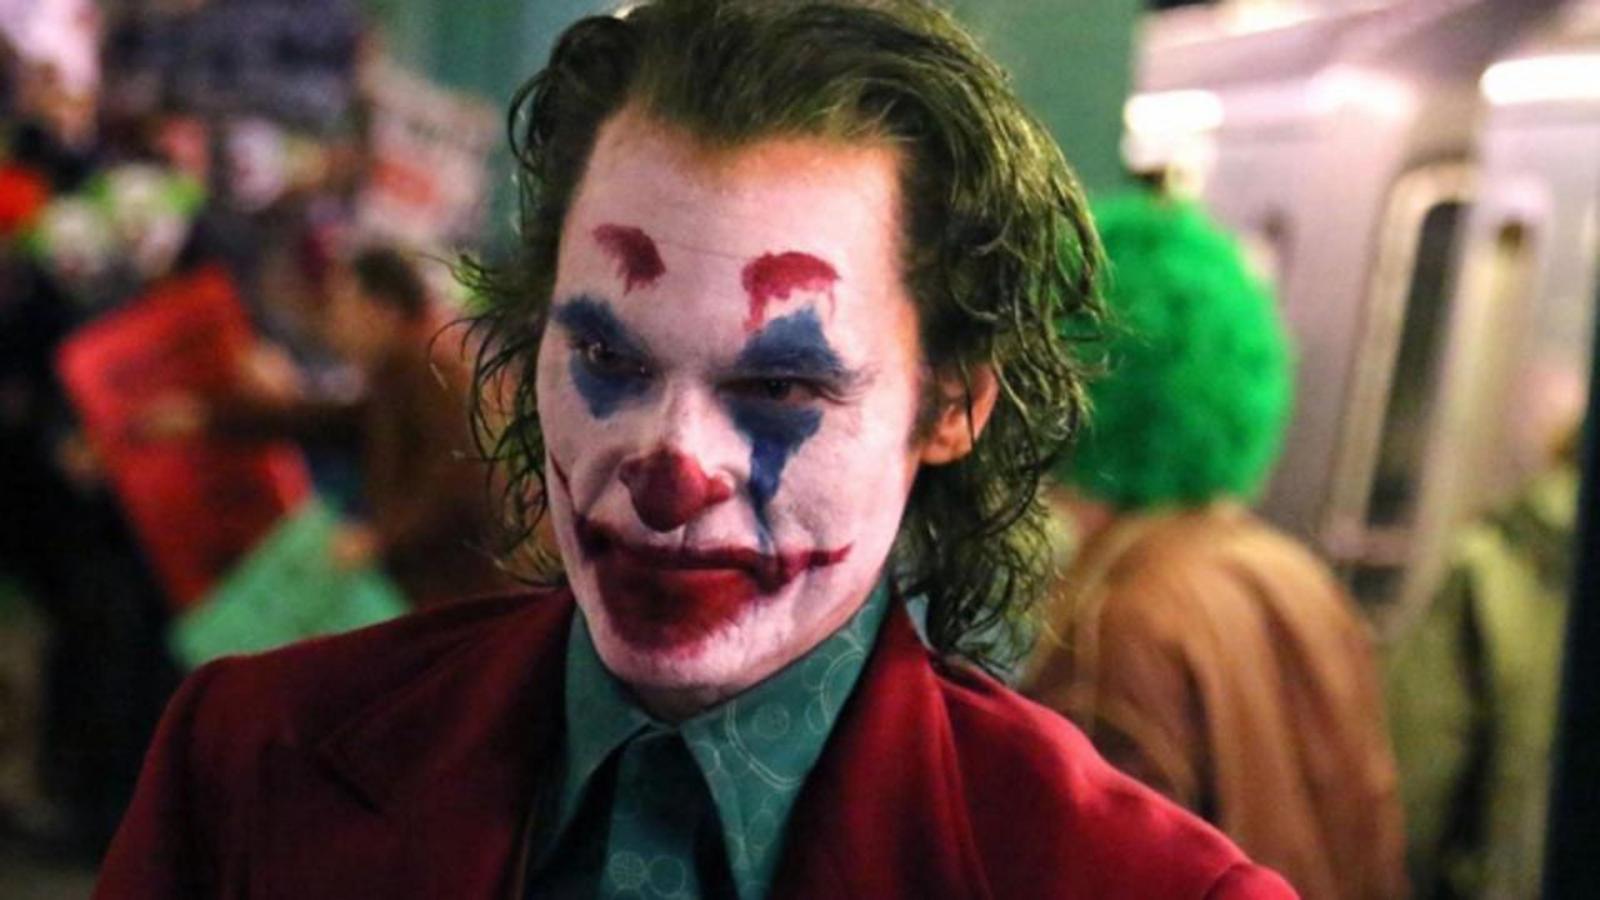 12 Outrageous Stories Behind Hollywood's Most Iconic Roles - image 9